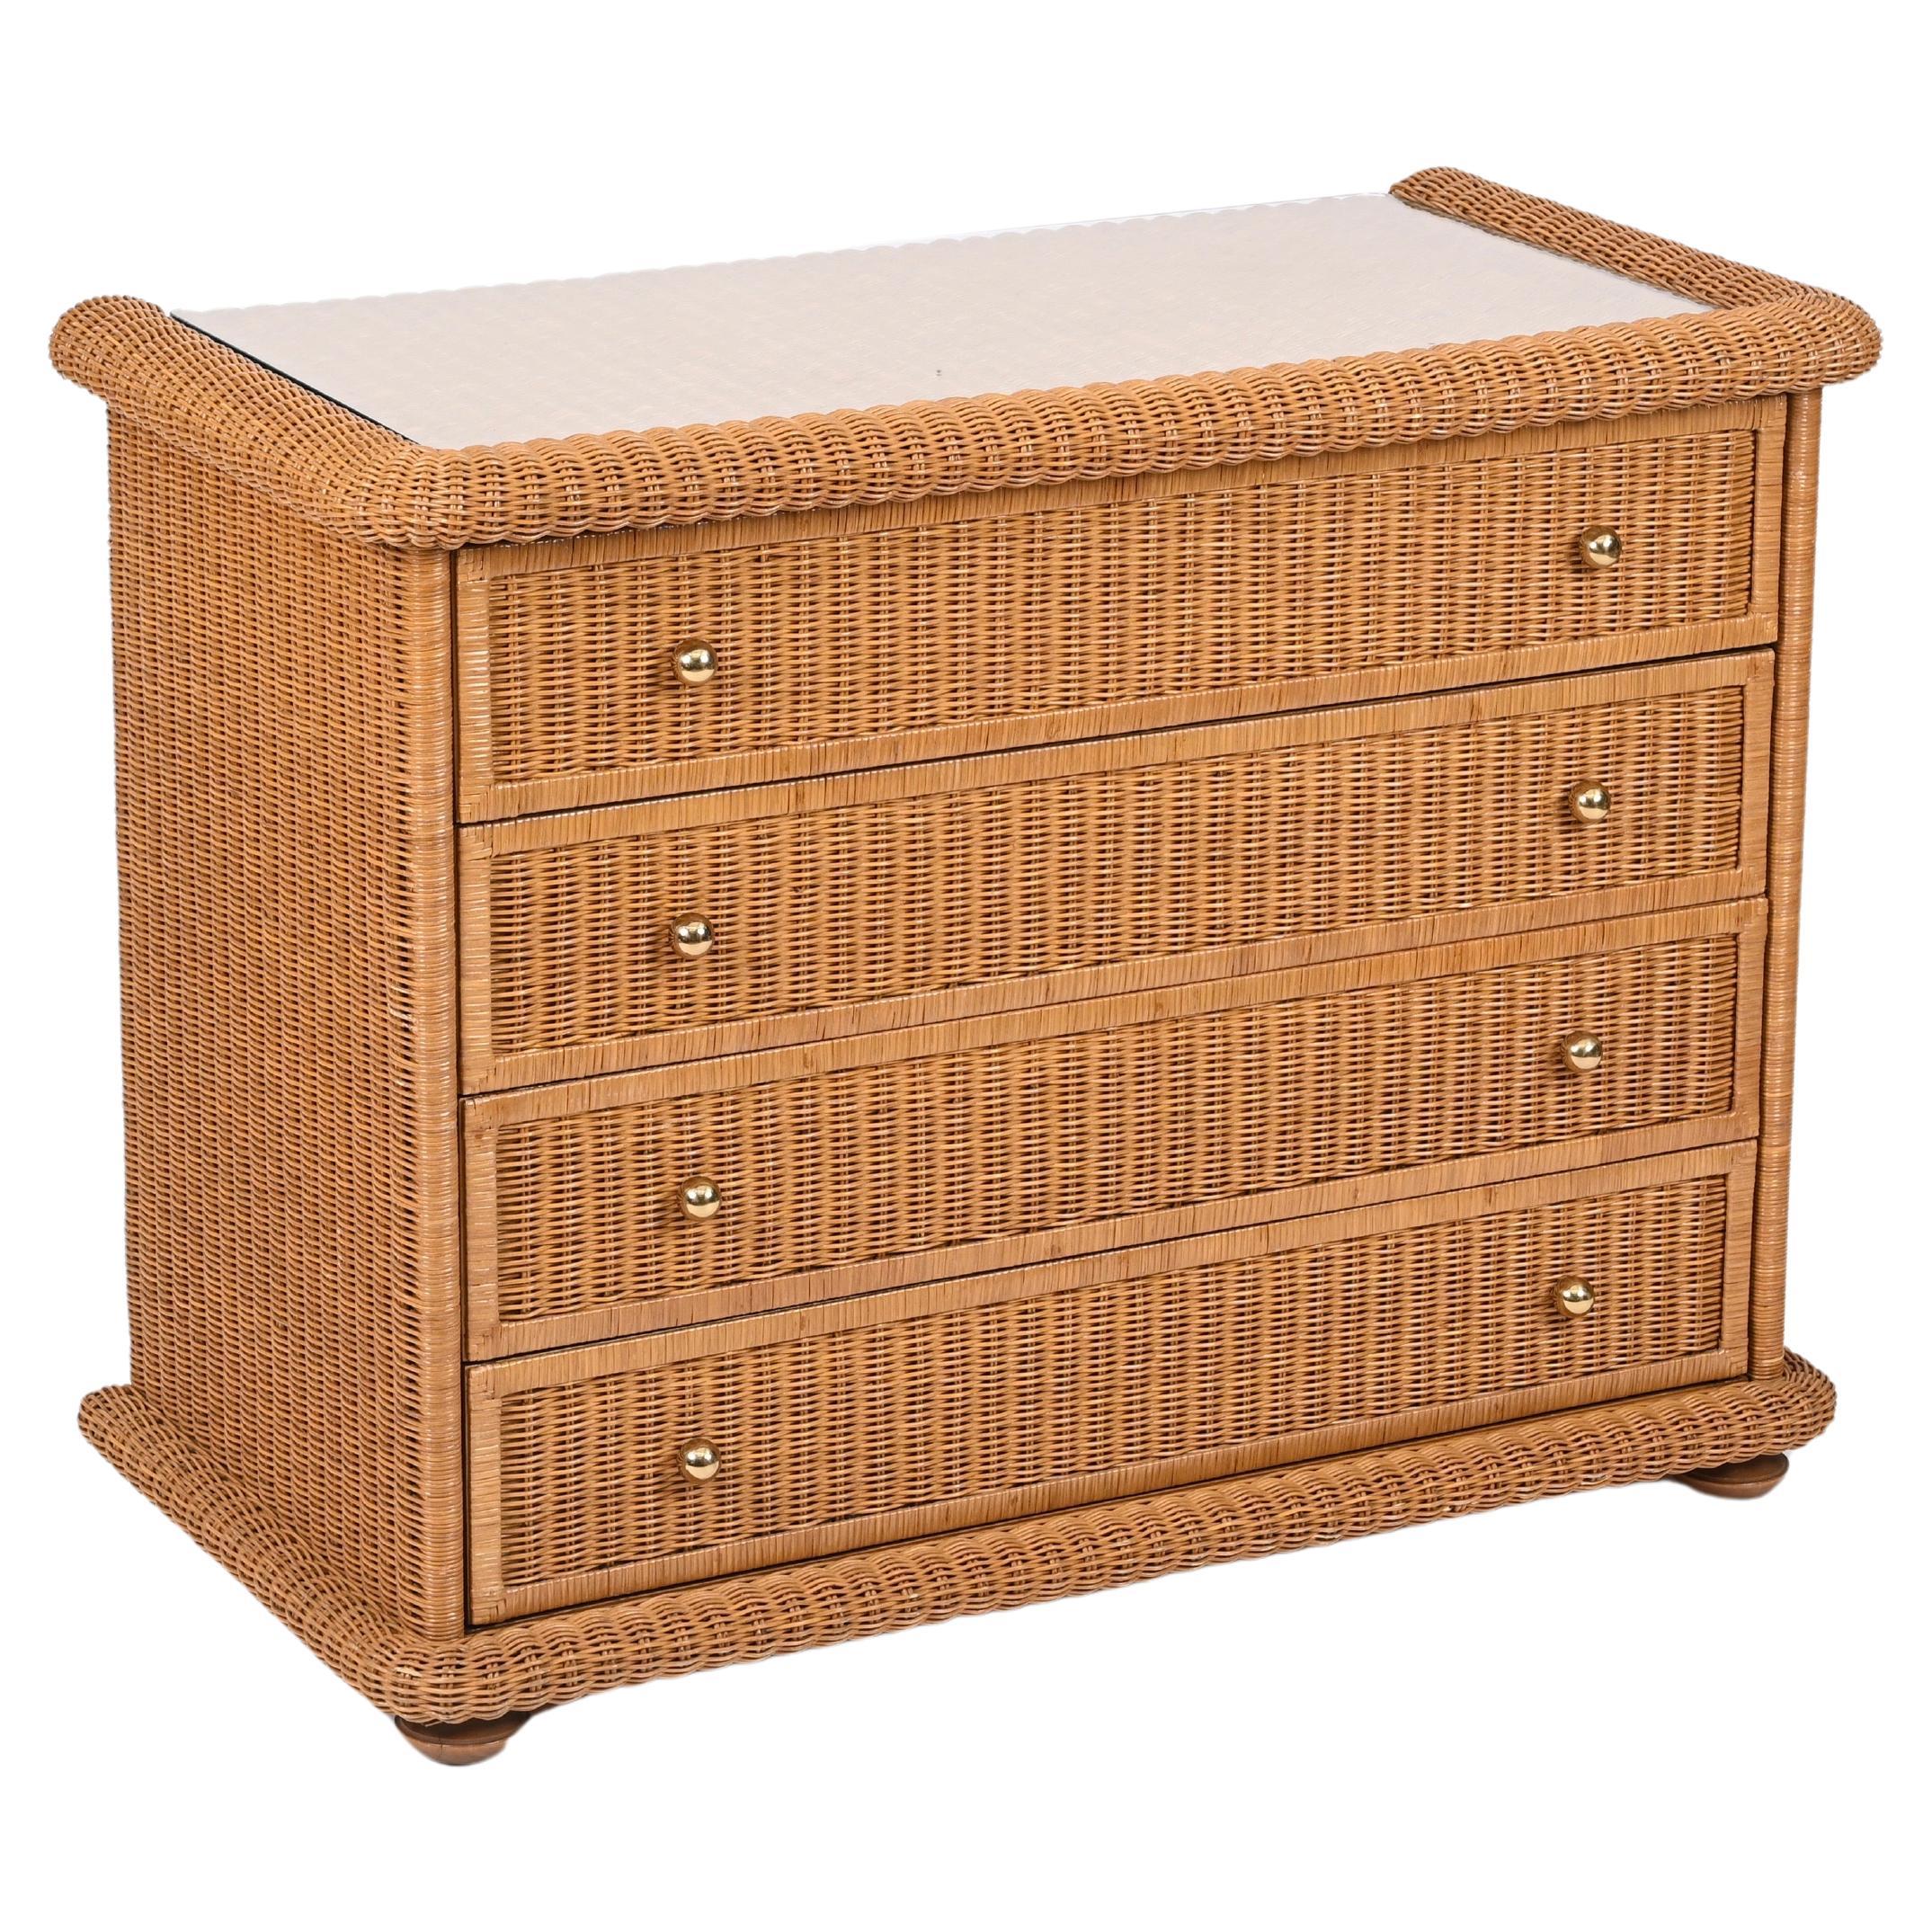 French Riviera Chest of Drawers in Woven Rattan by Vivai del Sud, Italy, 1970s For Sale